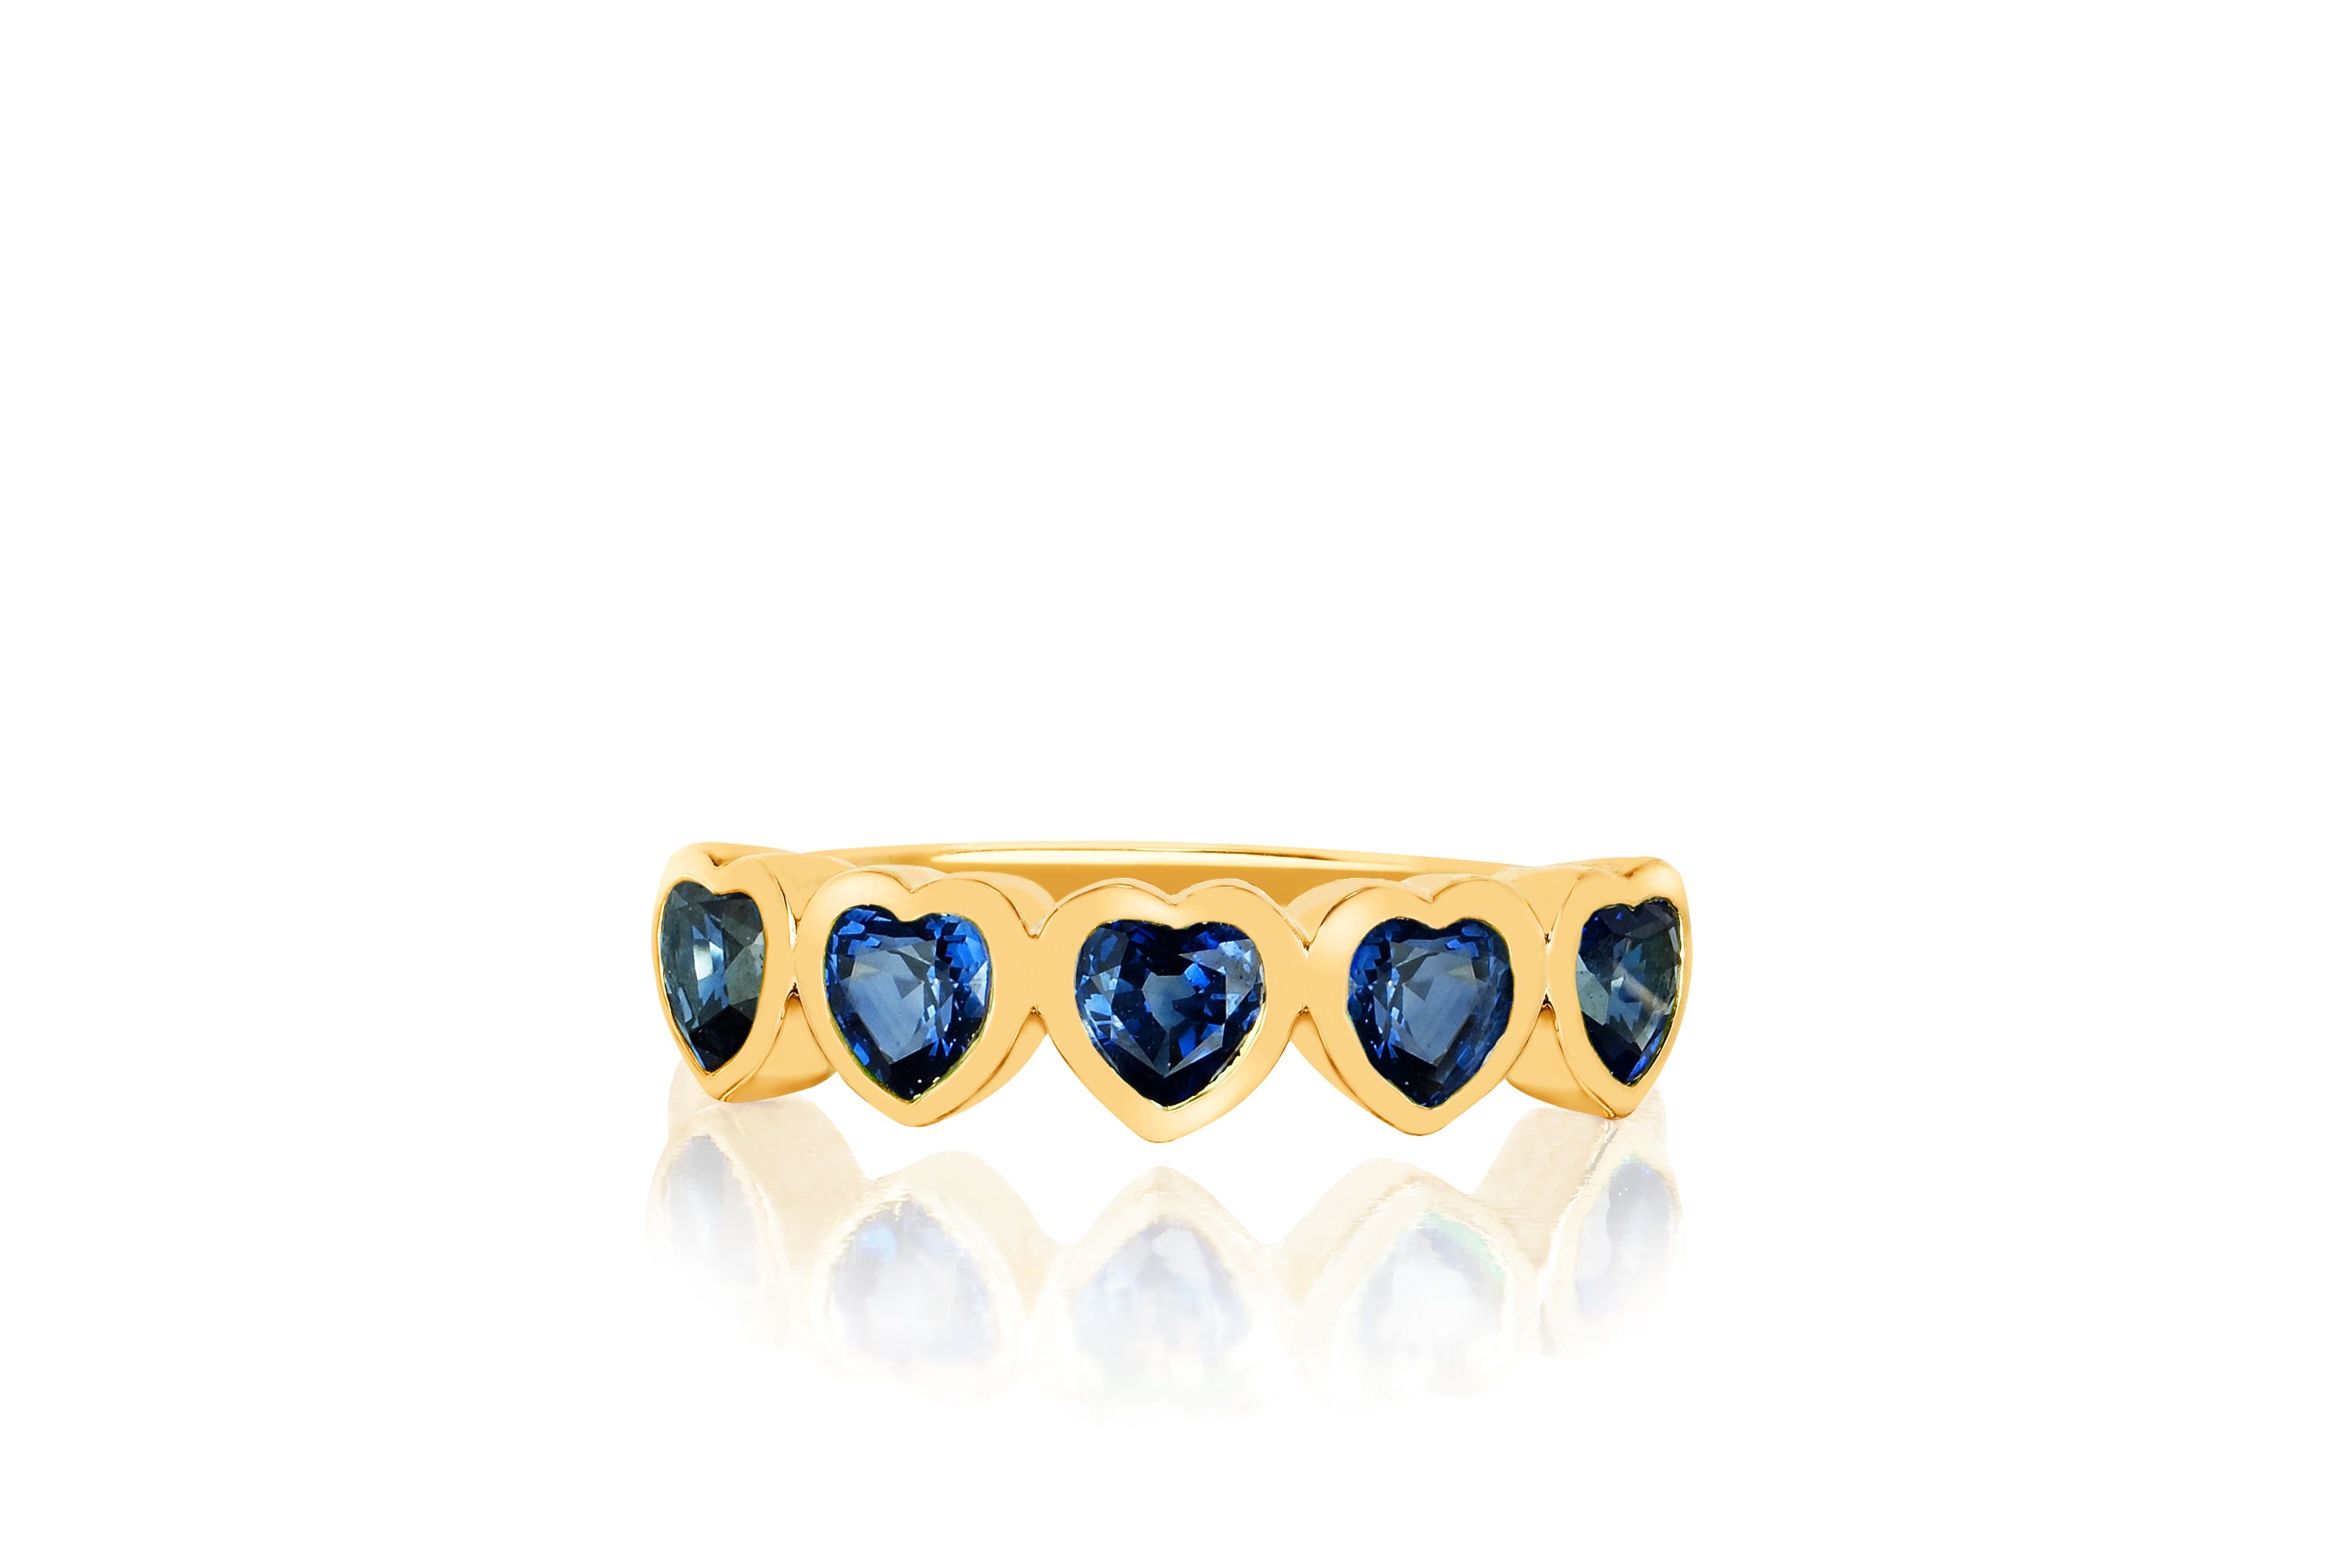 14k (karat) yellow gold ring with 5 blue sapphire jeweled hearts circling the top of the ring.